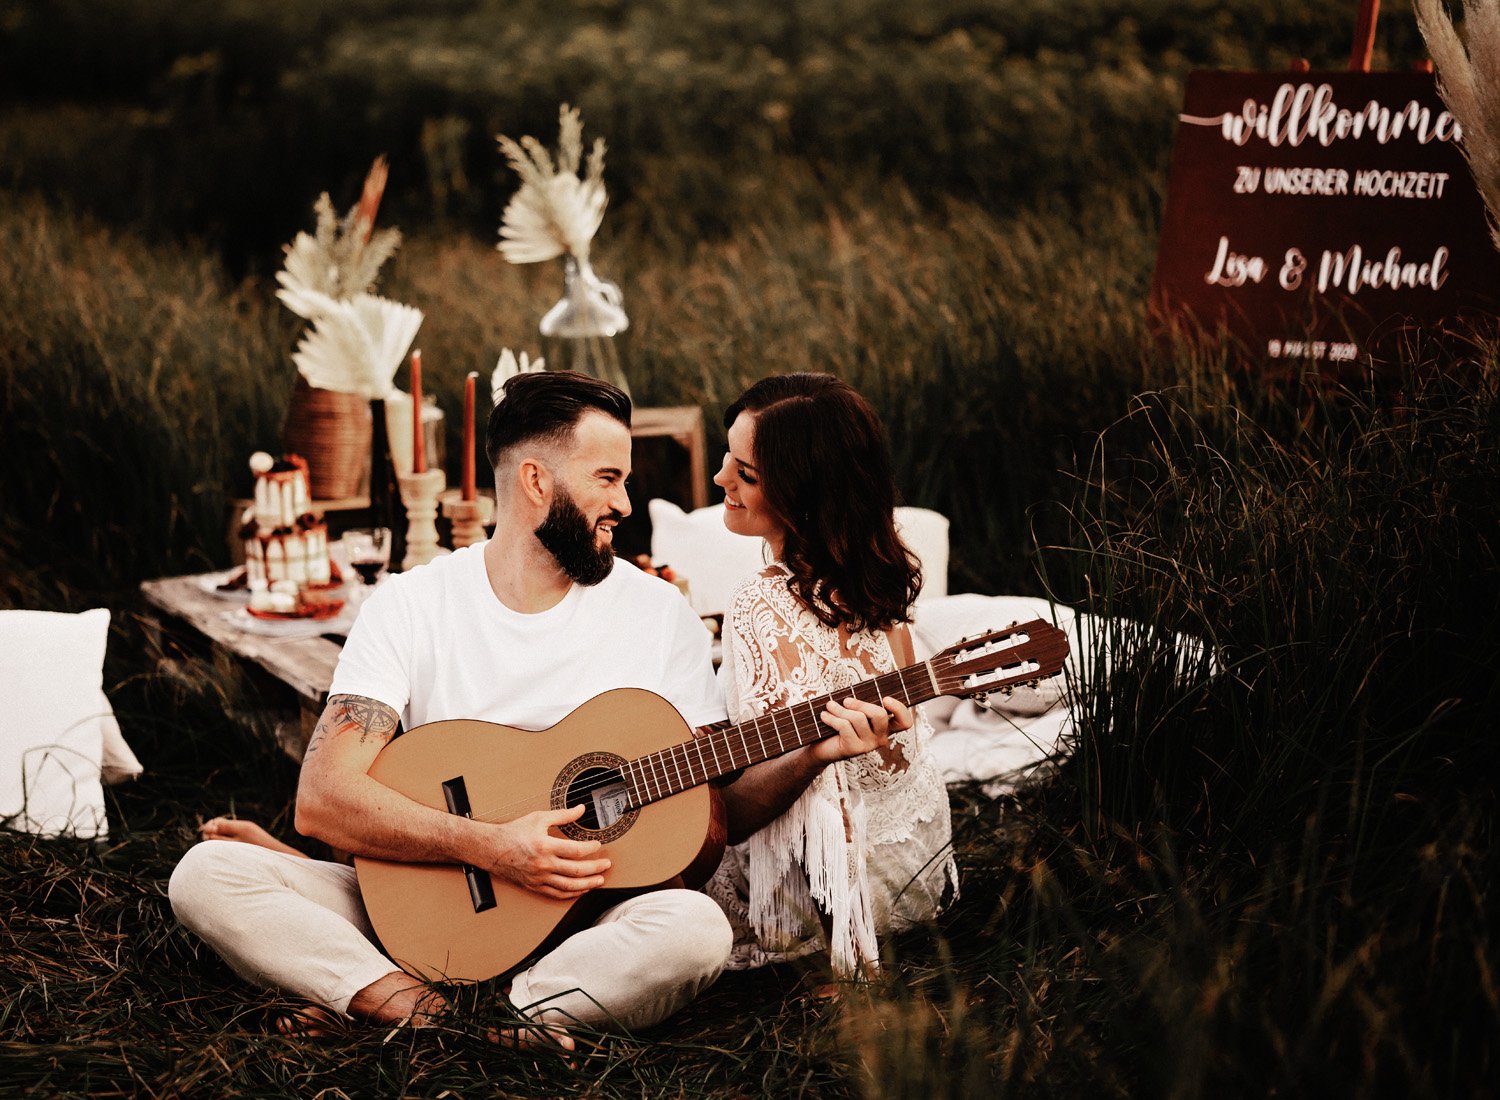 styled-picnic-engagement-photo-session-in-landstuhl-by couples-photographer-sarah-havens-kmc-germany (7).jpg